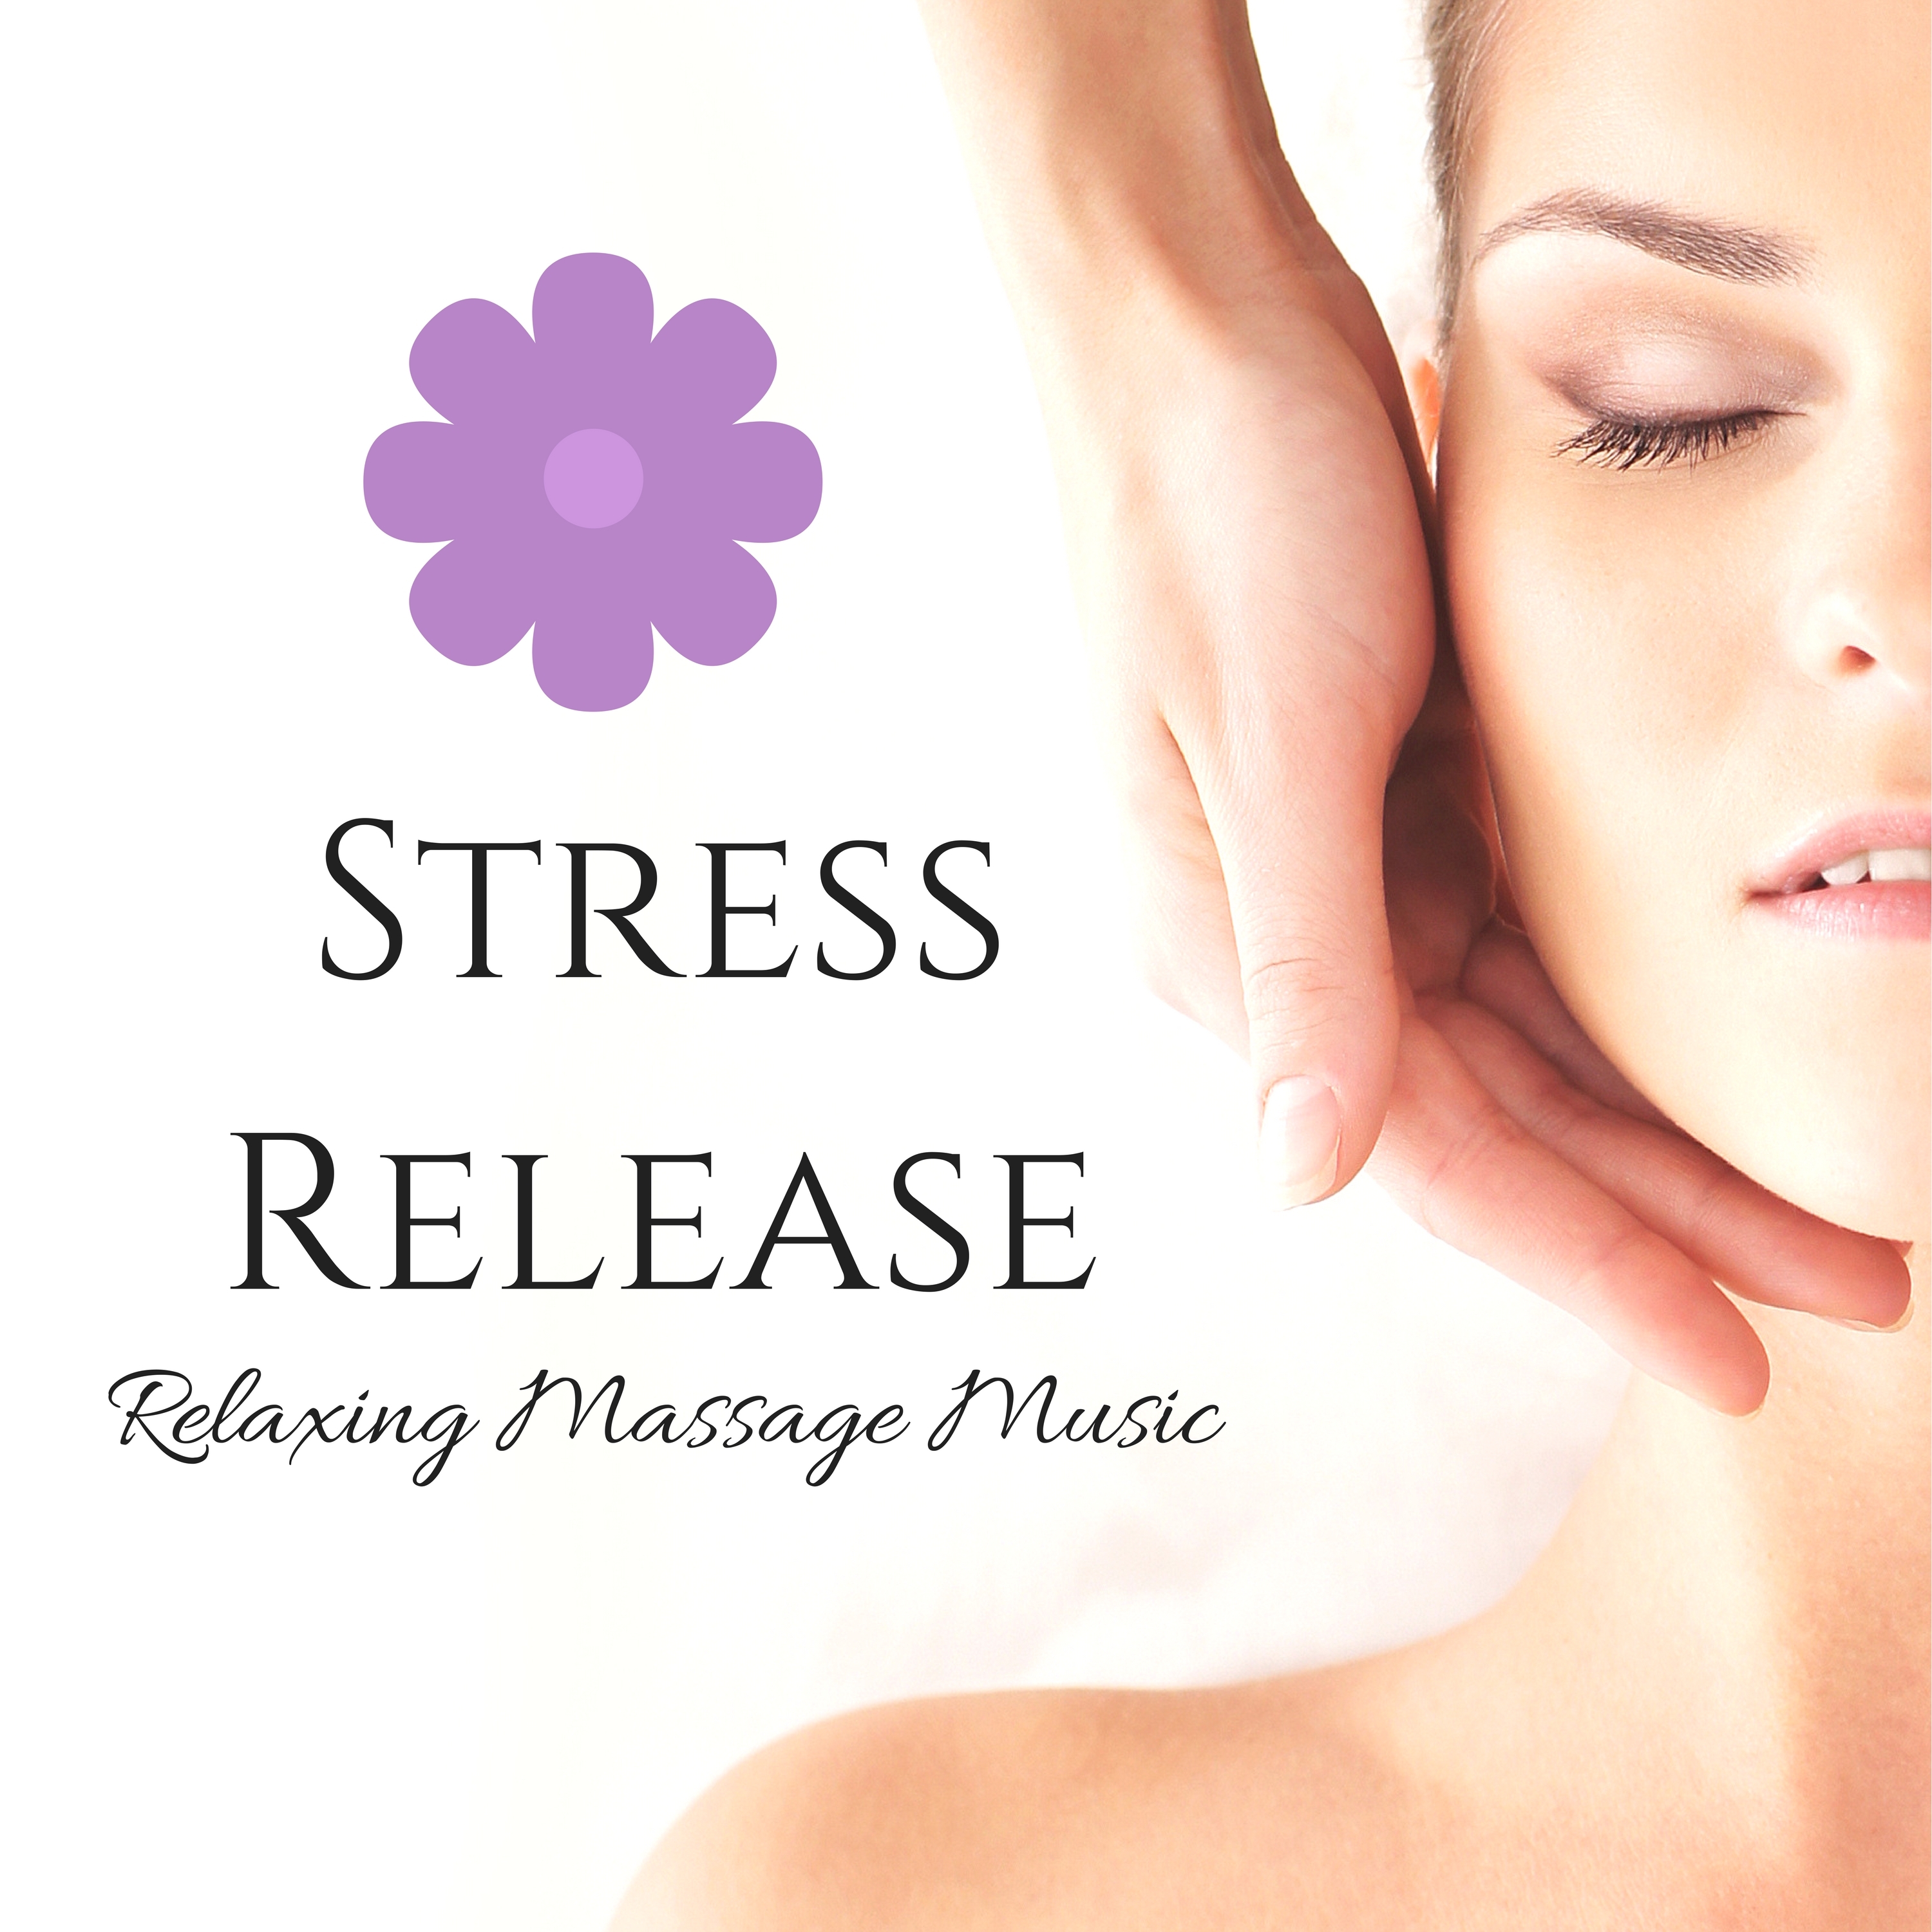 Stress Release: Relaxing Massage Music with Ambient New Age Sounds